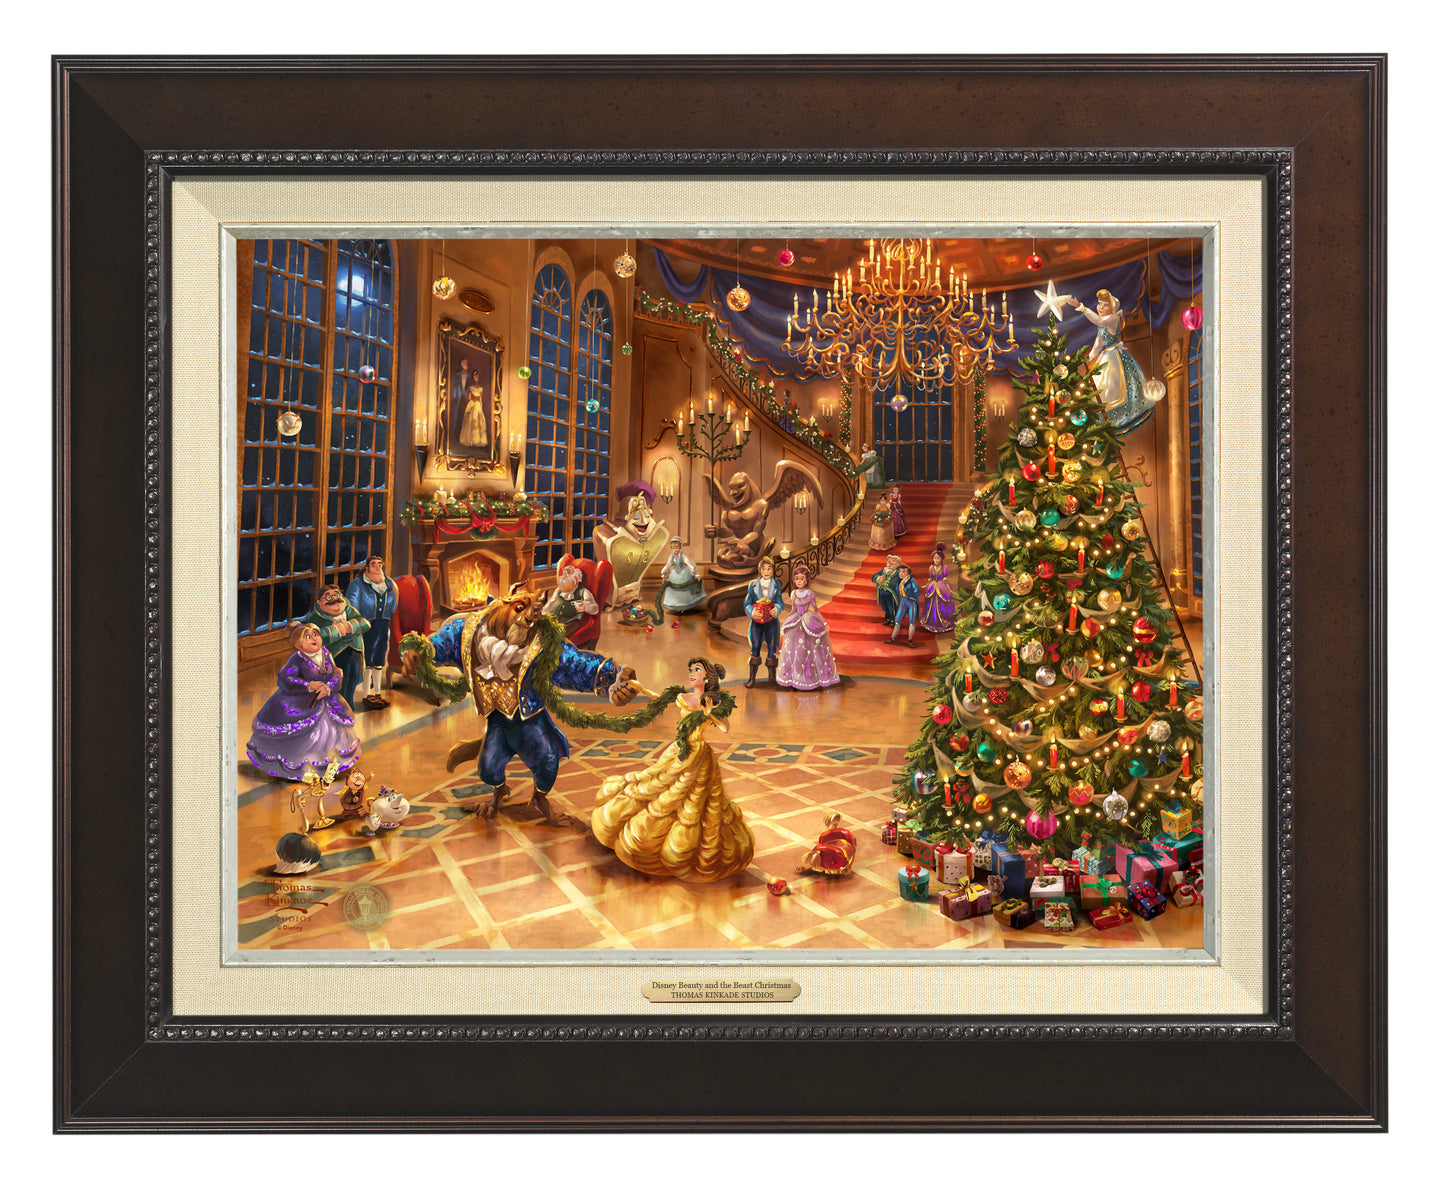 158462_CLF_Disney Beauty and the Beast Christmas Celebration_12x16_Framed_Classic_Expresso.jpg